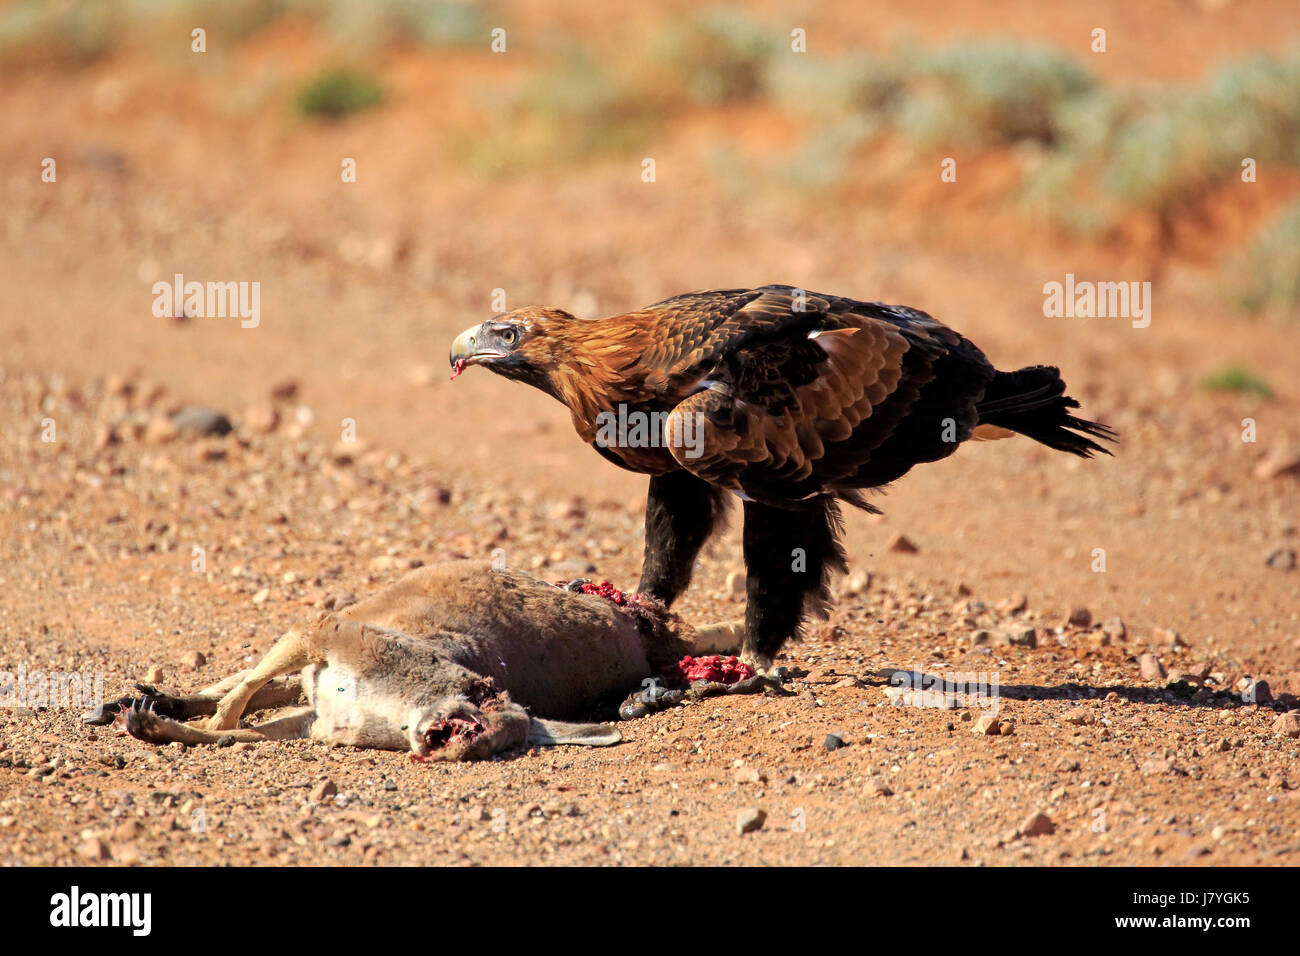 Wedge-tailed eagle (Aquila audax), adult at prey, Sturt National Park, New South Wales, Australia Stock Photo